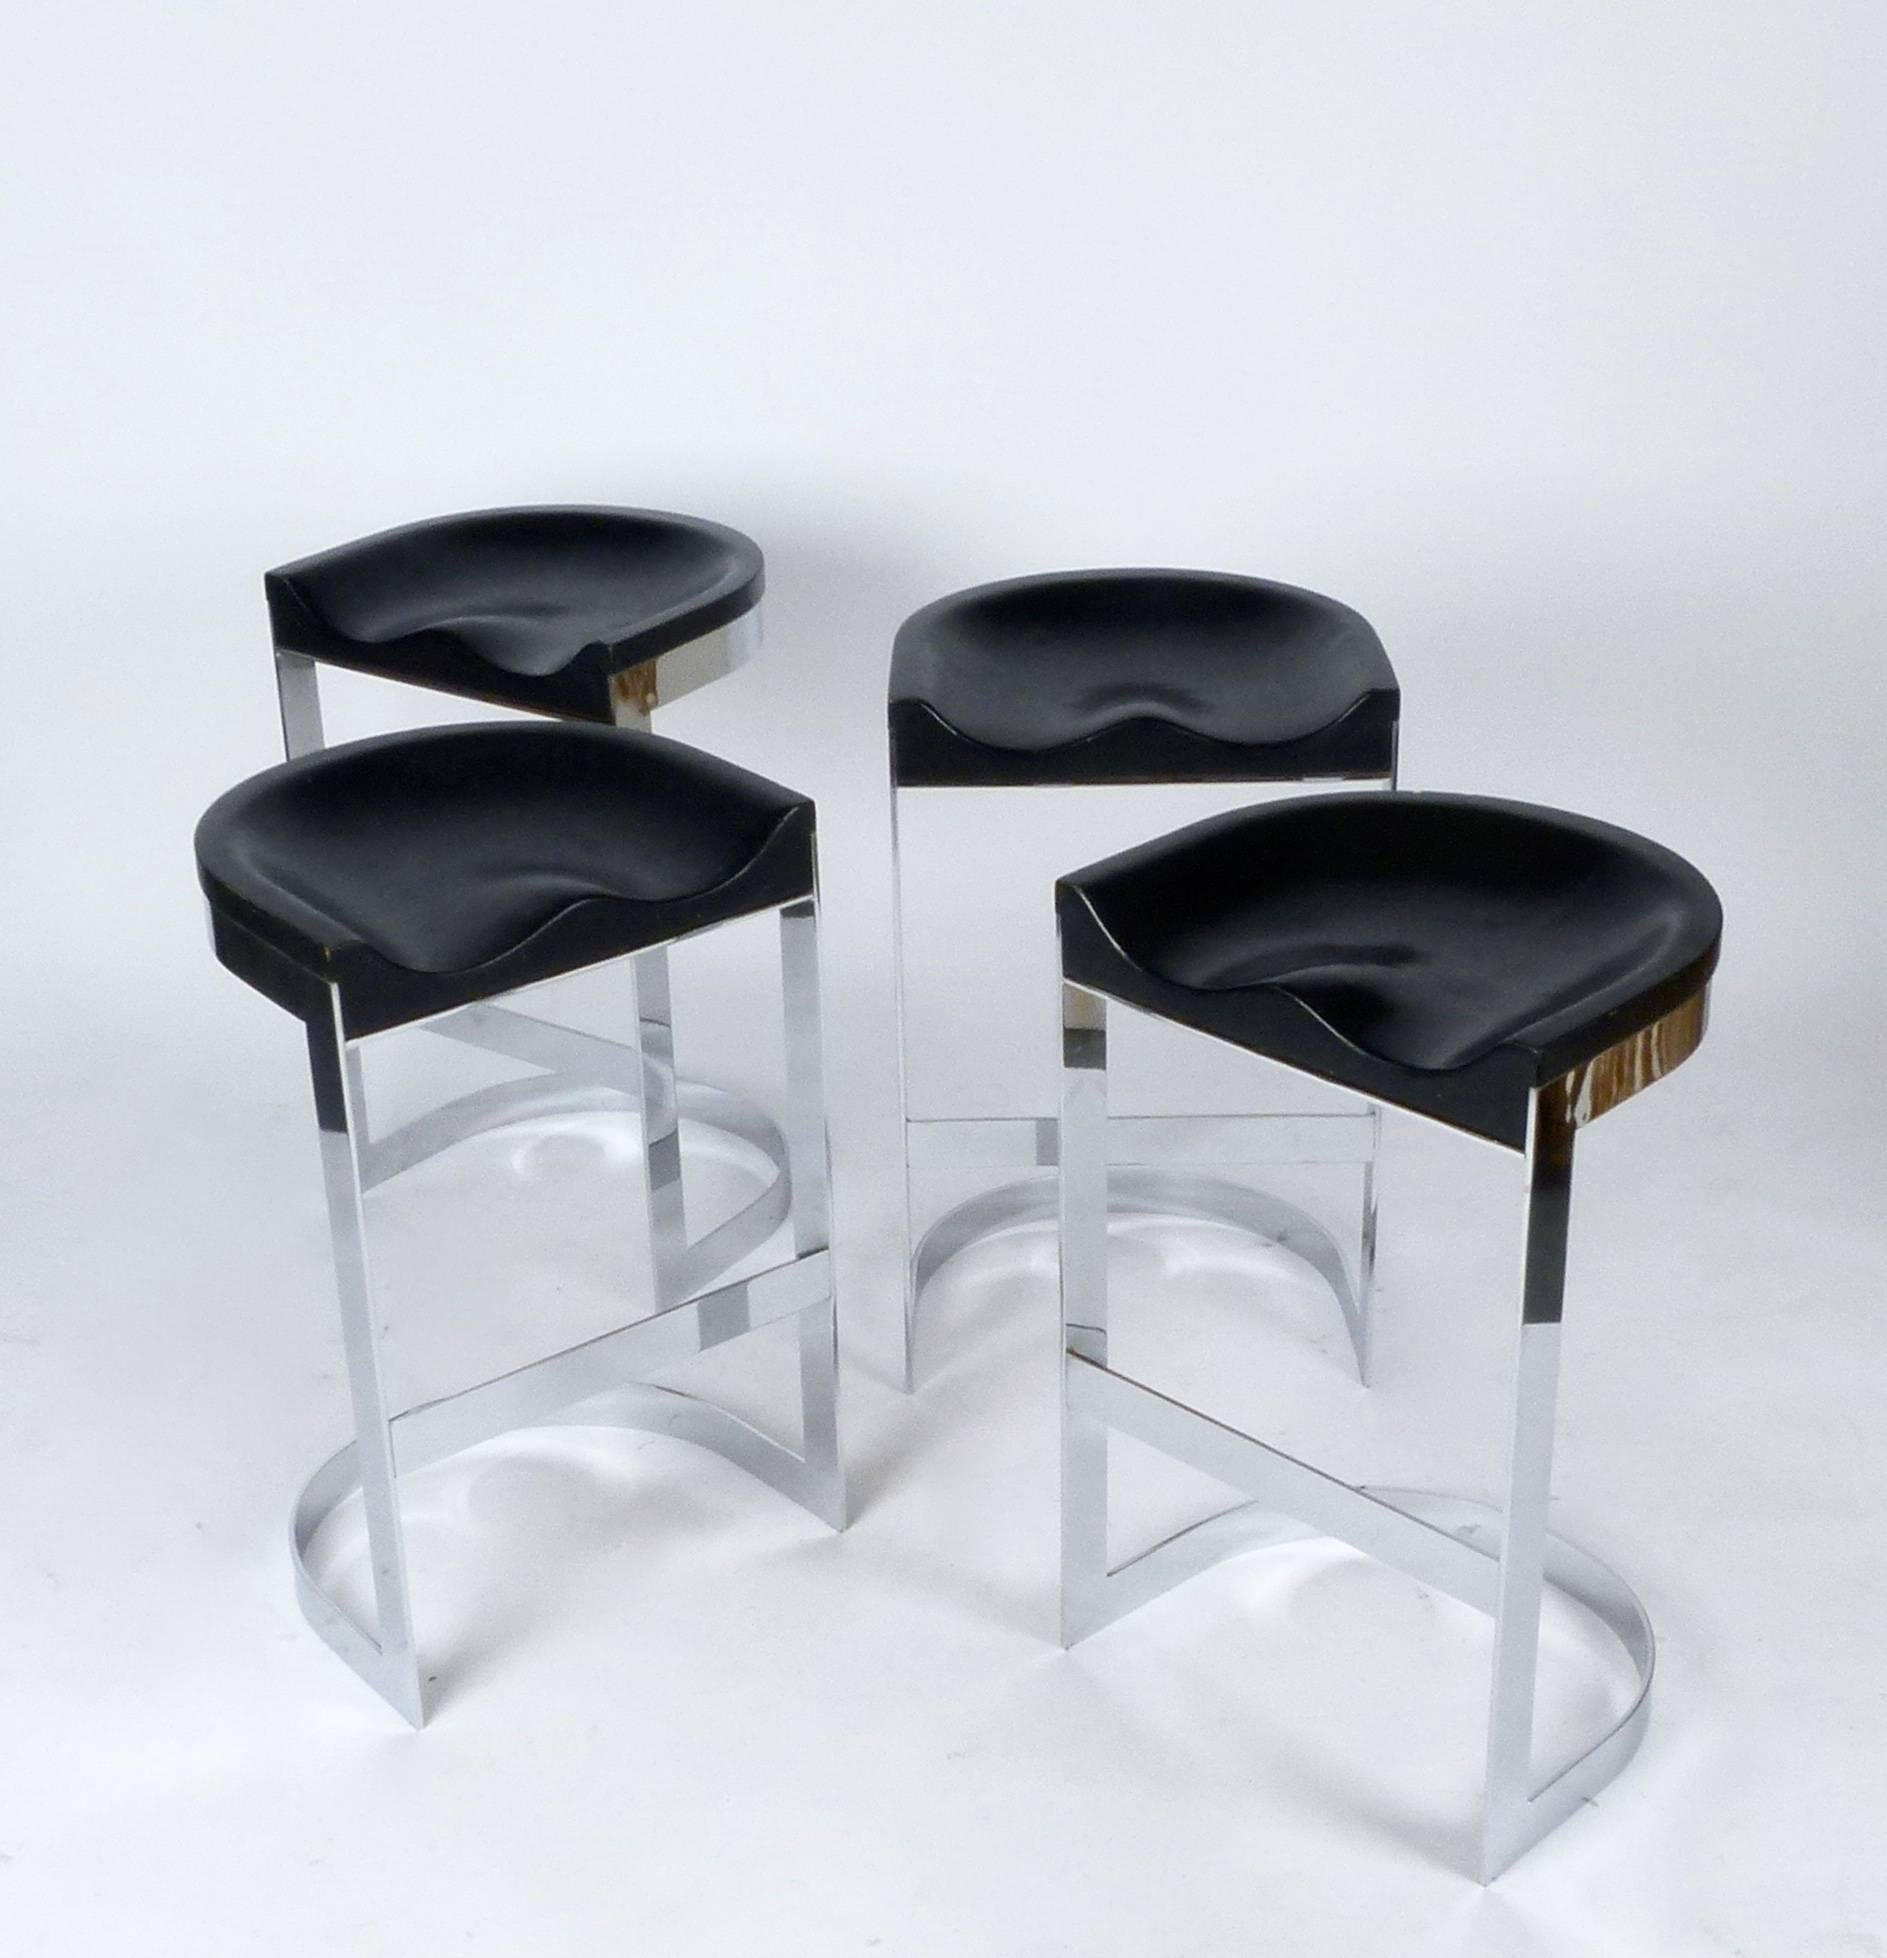 Cantilevered counter height bar stool with solid chromed steel base and leather wrapped sculpted seats designed by Warren Bacon, 1970s. Two available, priced separately.